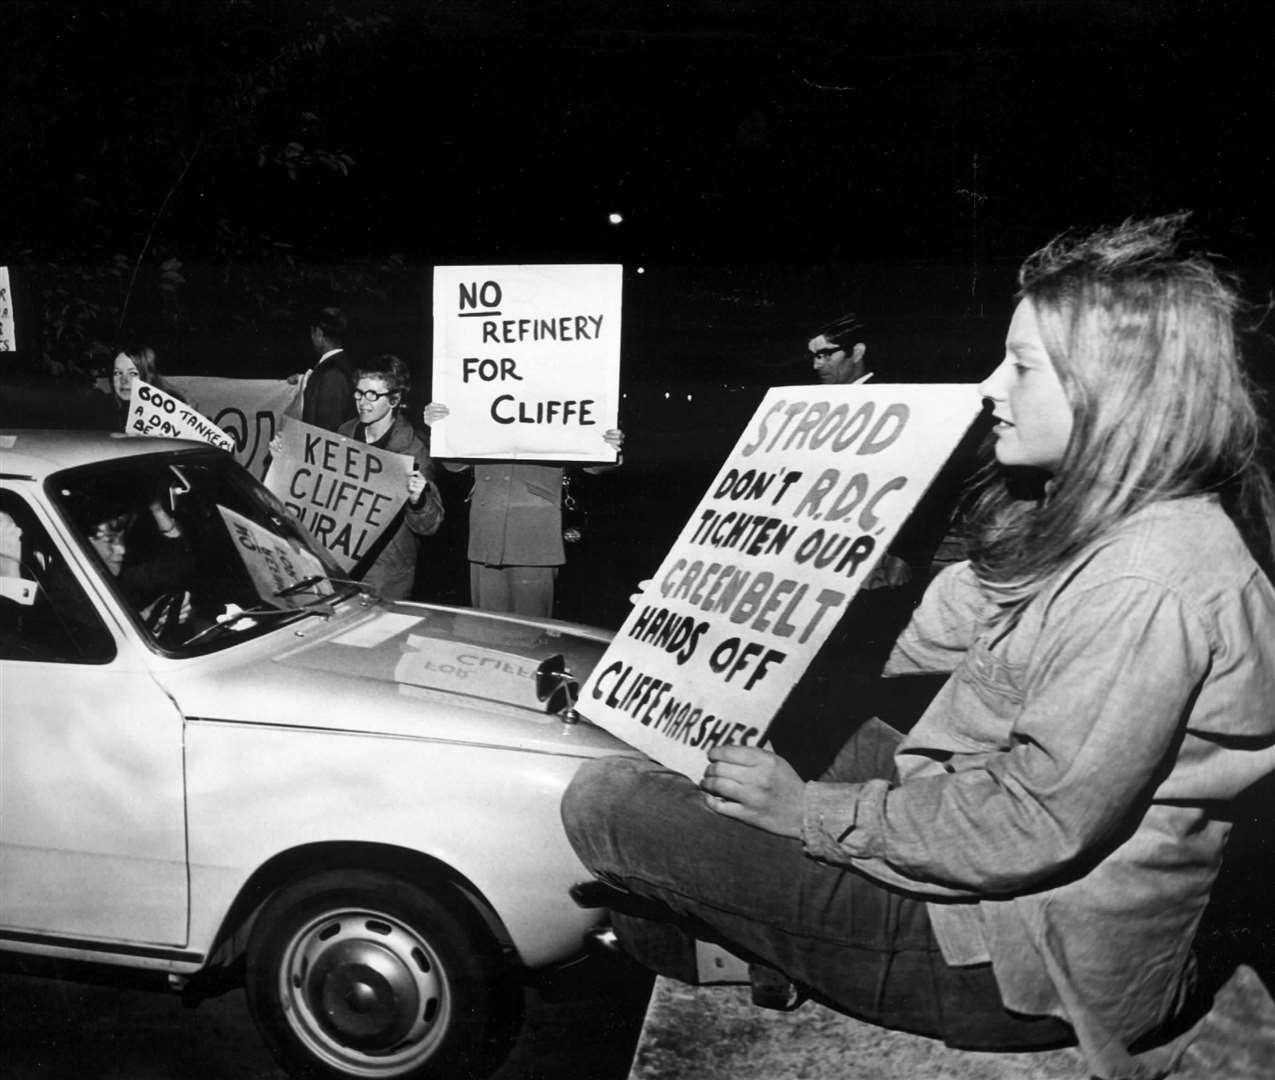 Protesters at Cliffe in November 1971 opposed to plans by the Burmah-Total oil company to build a refinery on Cliffe marshes